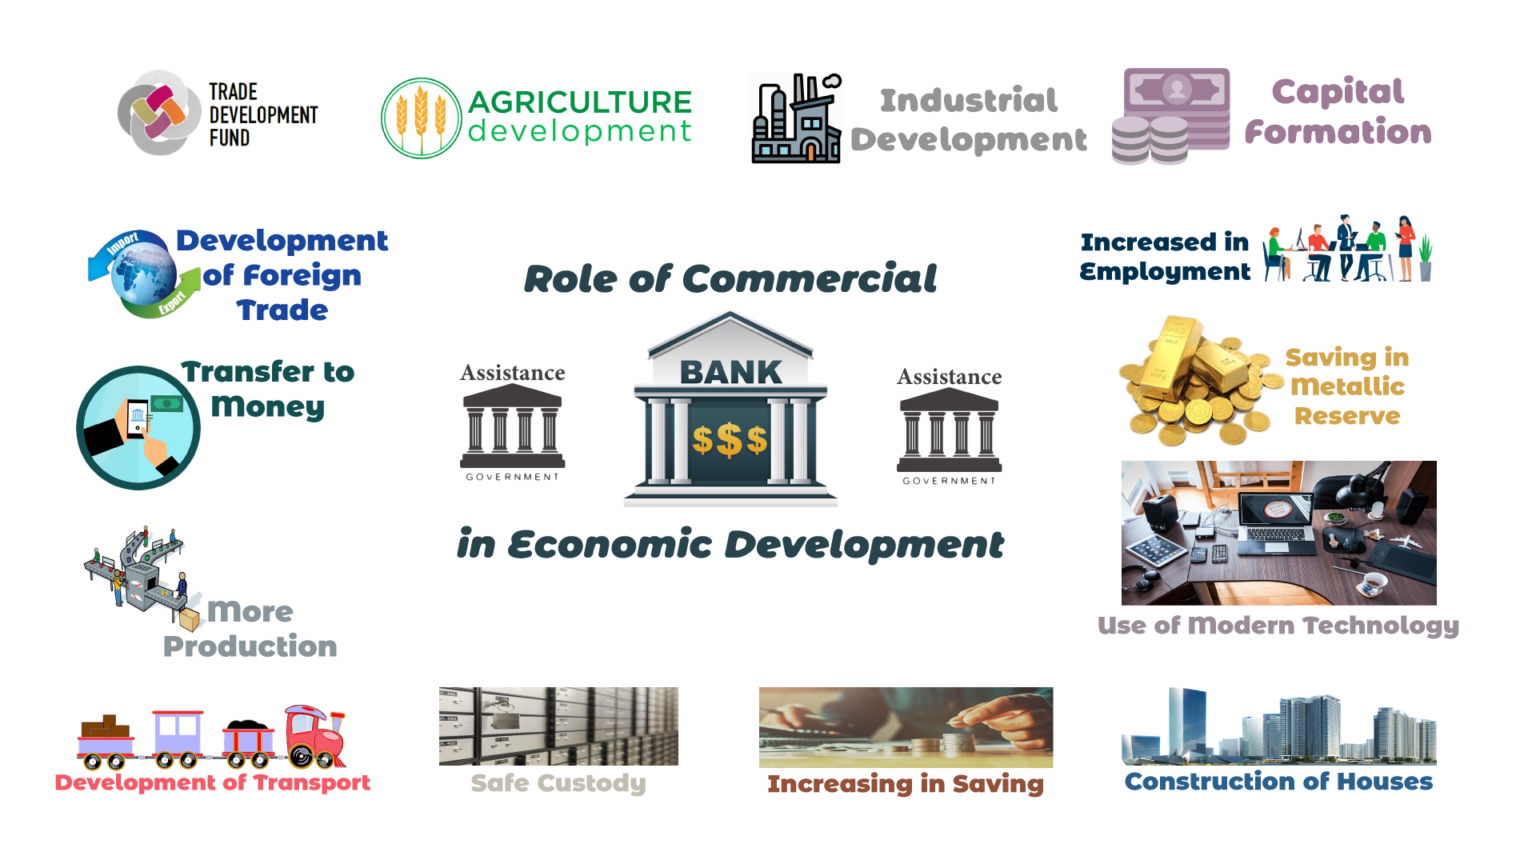 Role Of Commercial Banks In Economic Development Library